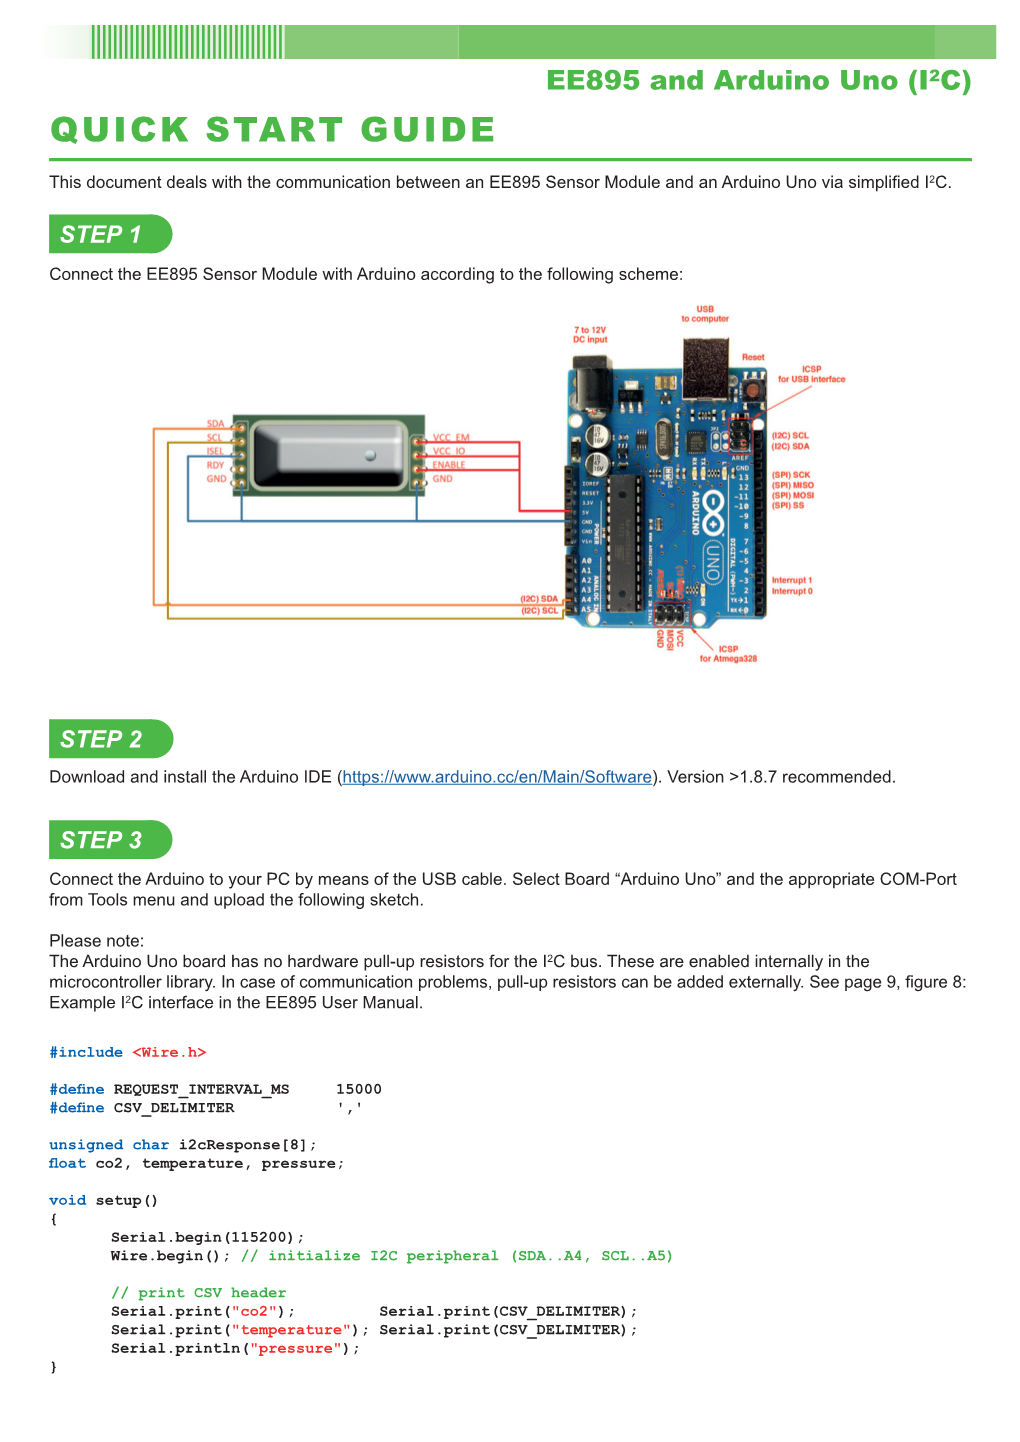 EE895 Quick Start Guide for Arduino Uno (I2C)